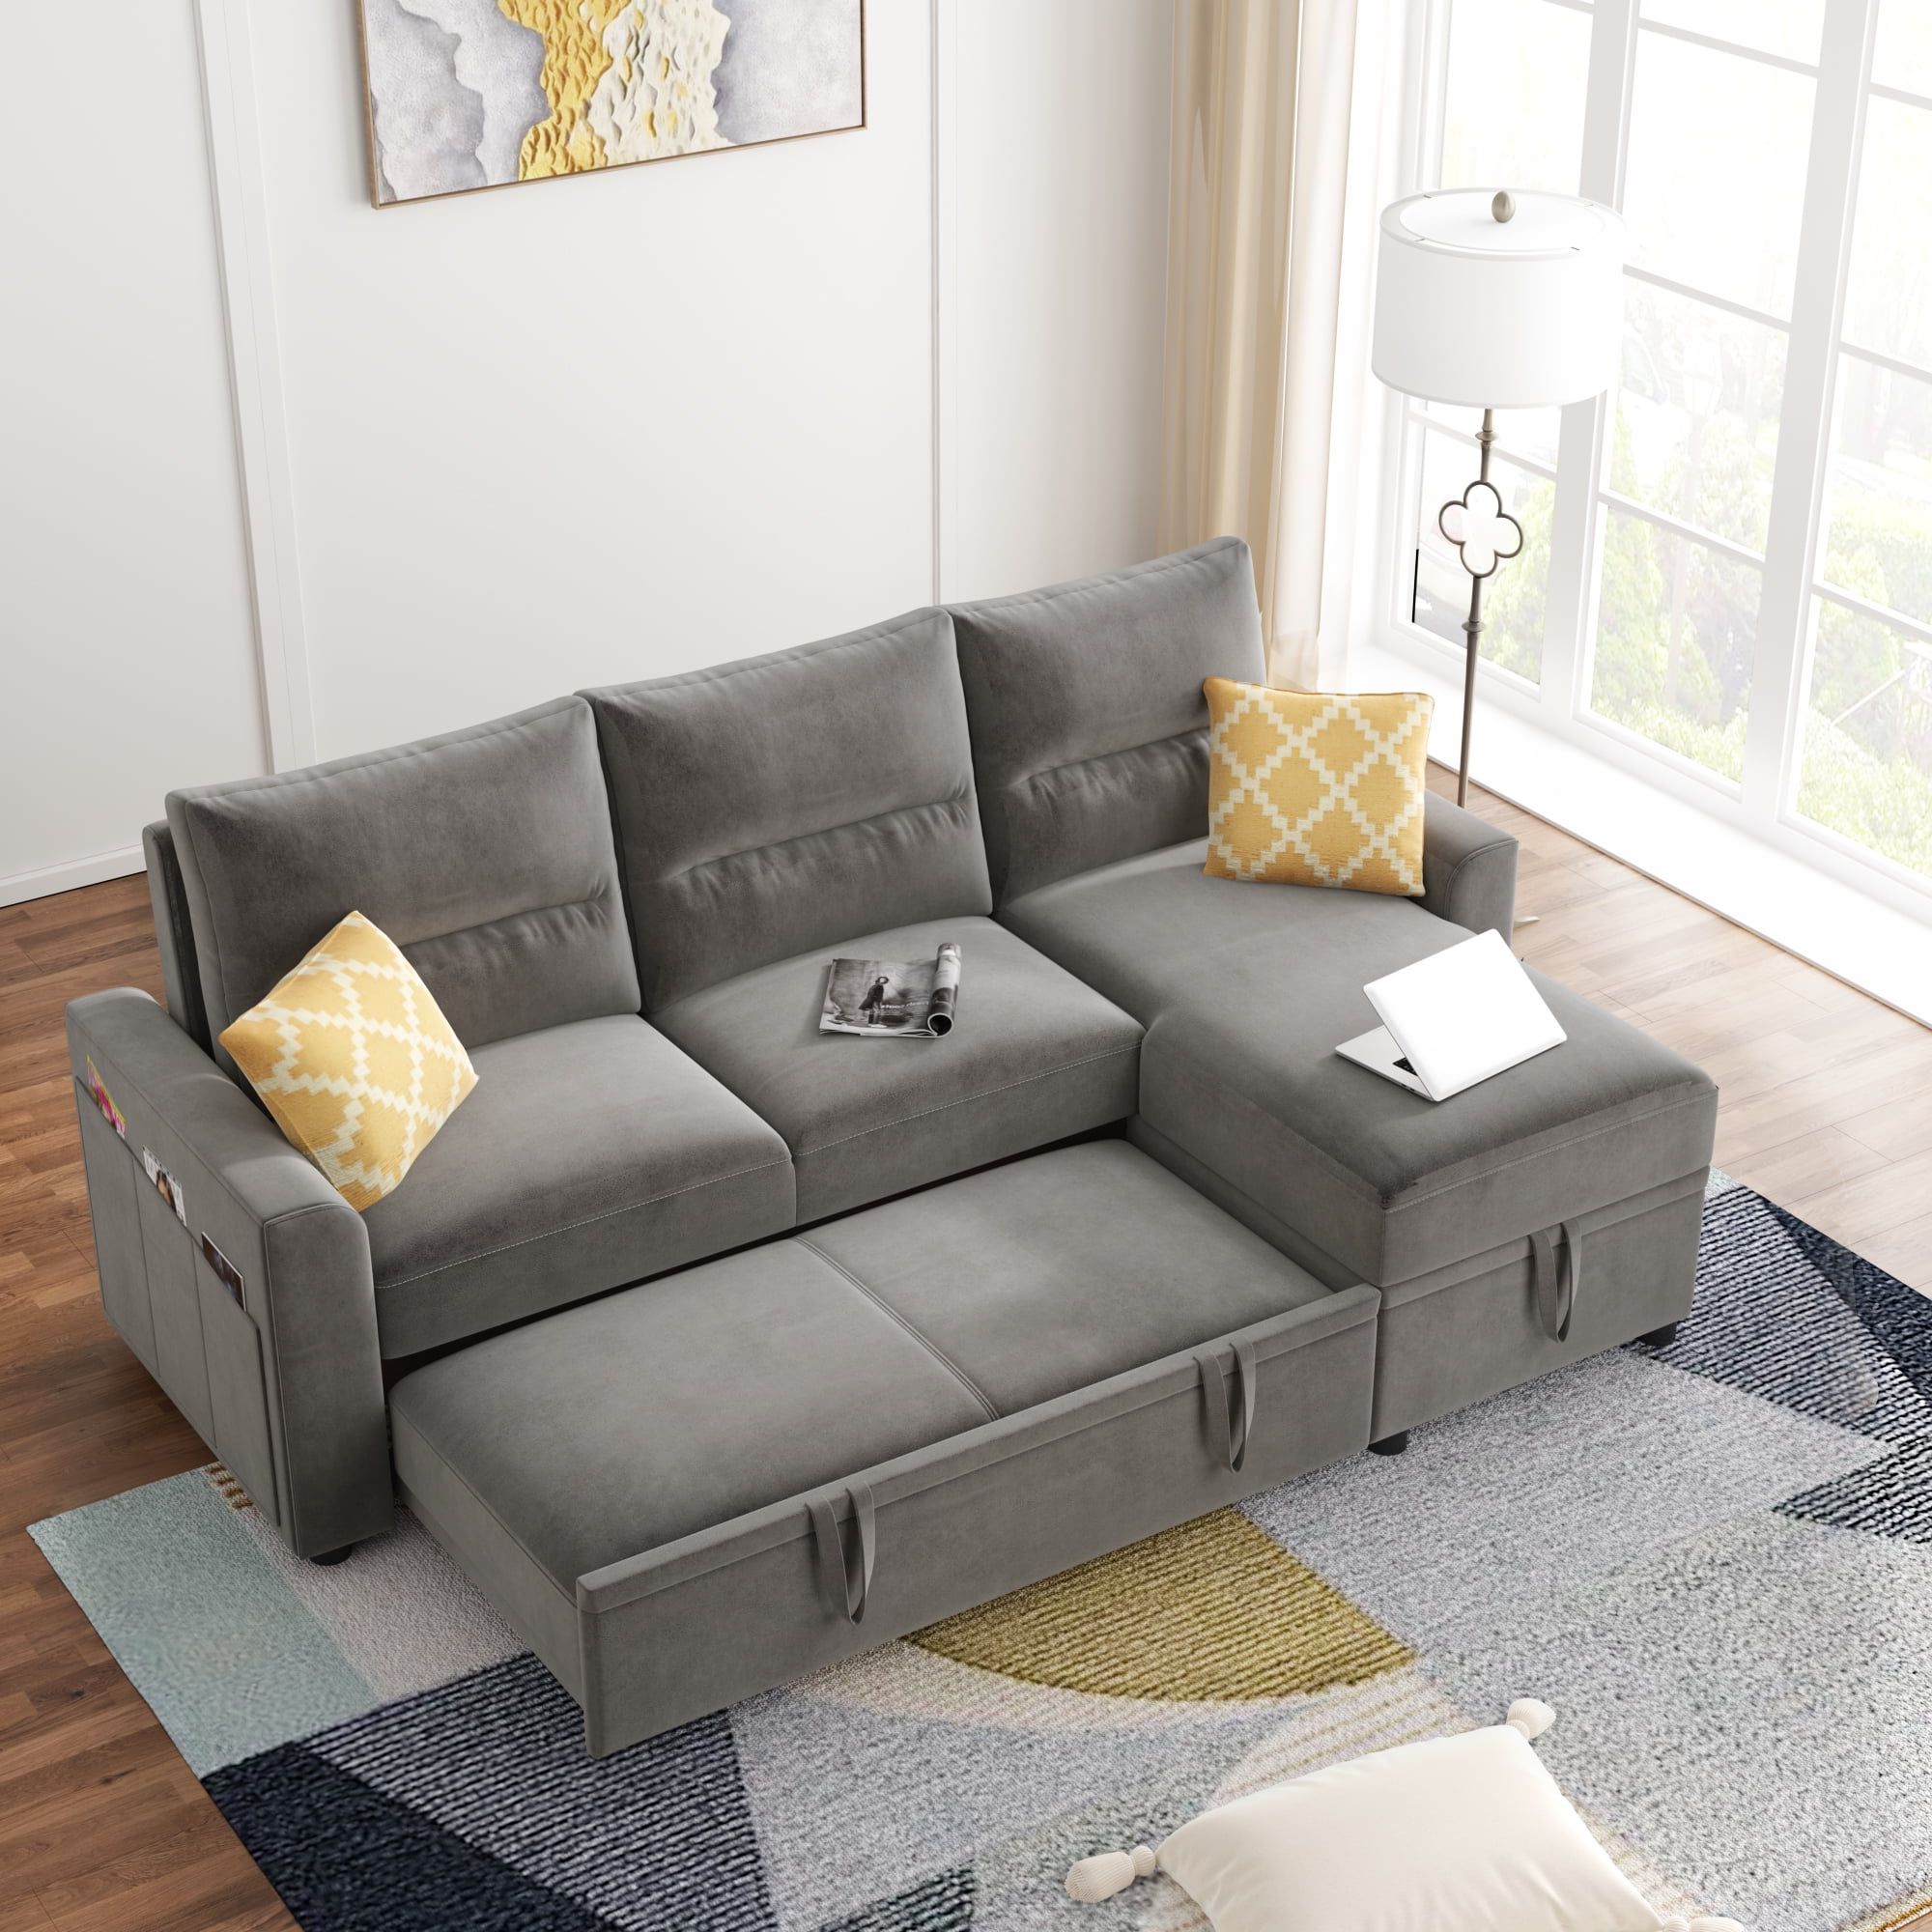 2 In 1 Gray Pull Out Sofa Beds Intended For Well Known Upholstered Sectional Sleeper Sofa, Segmart  (View 12 of 15)